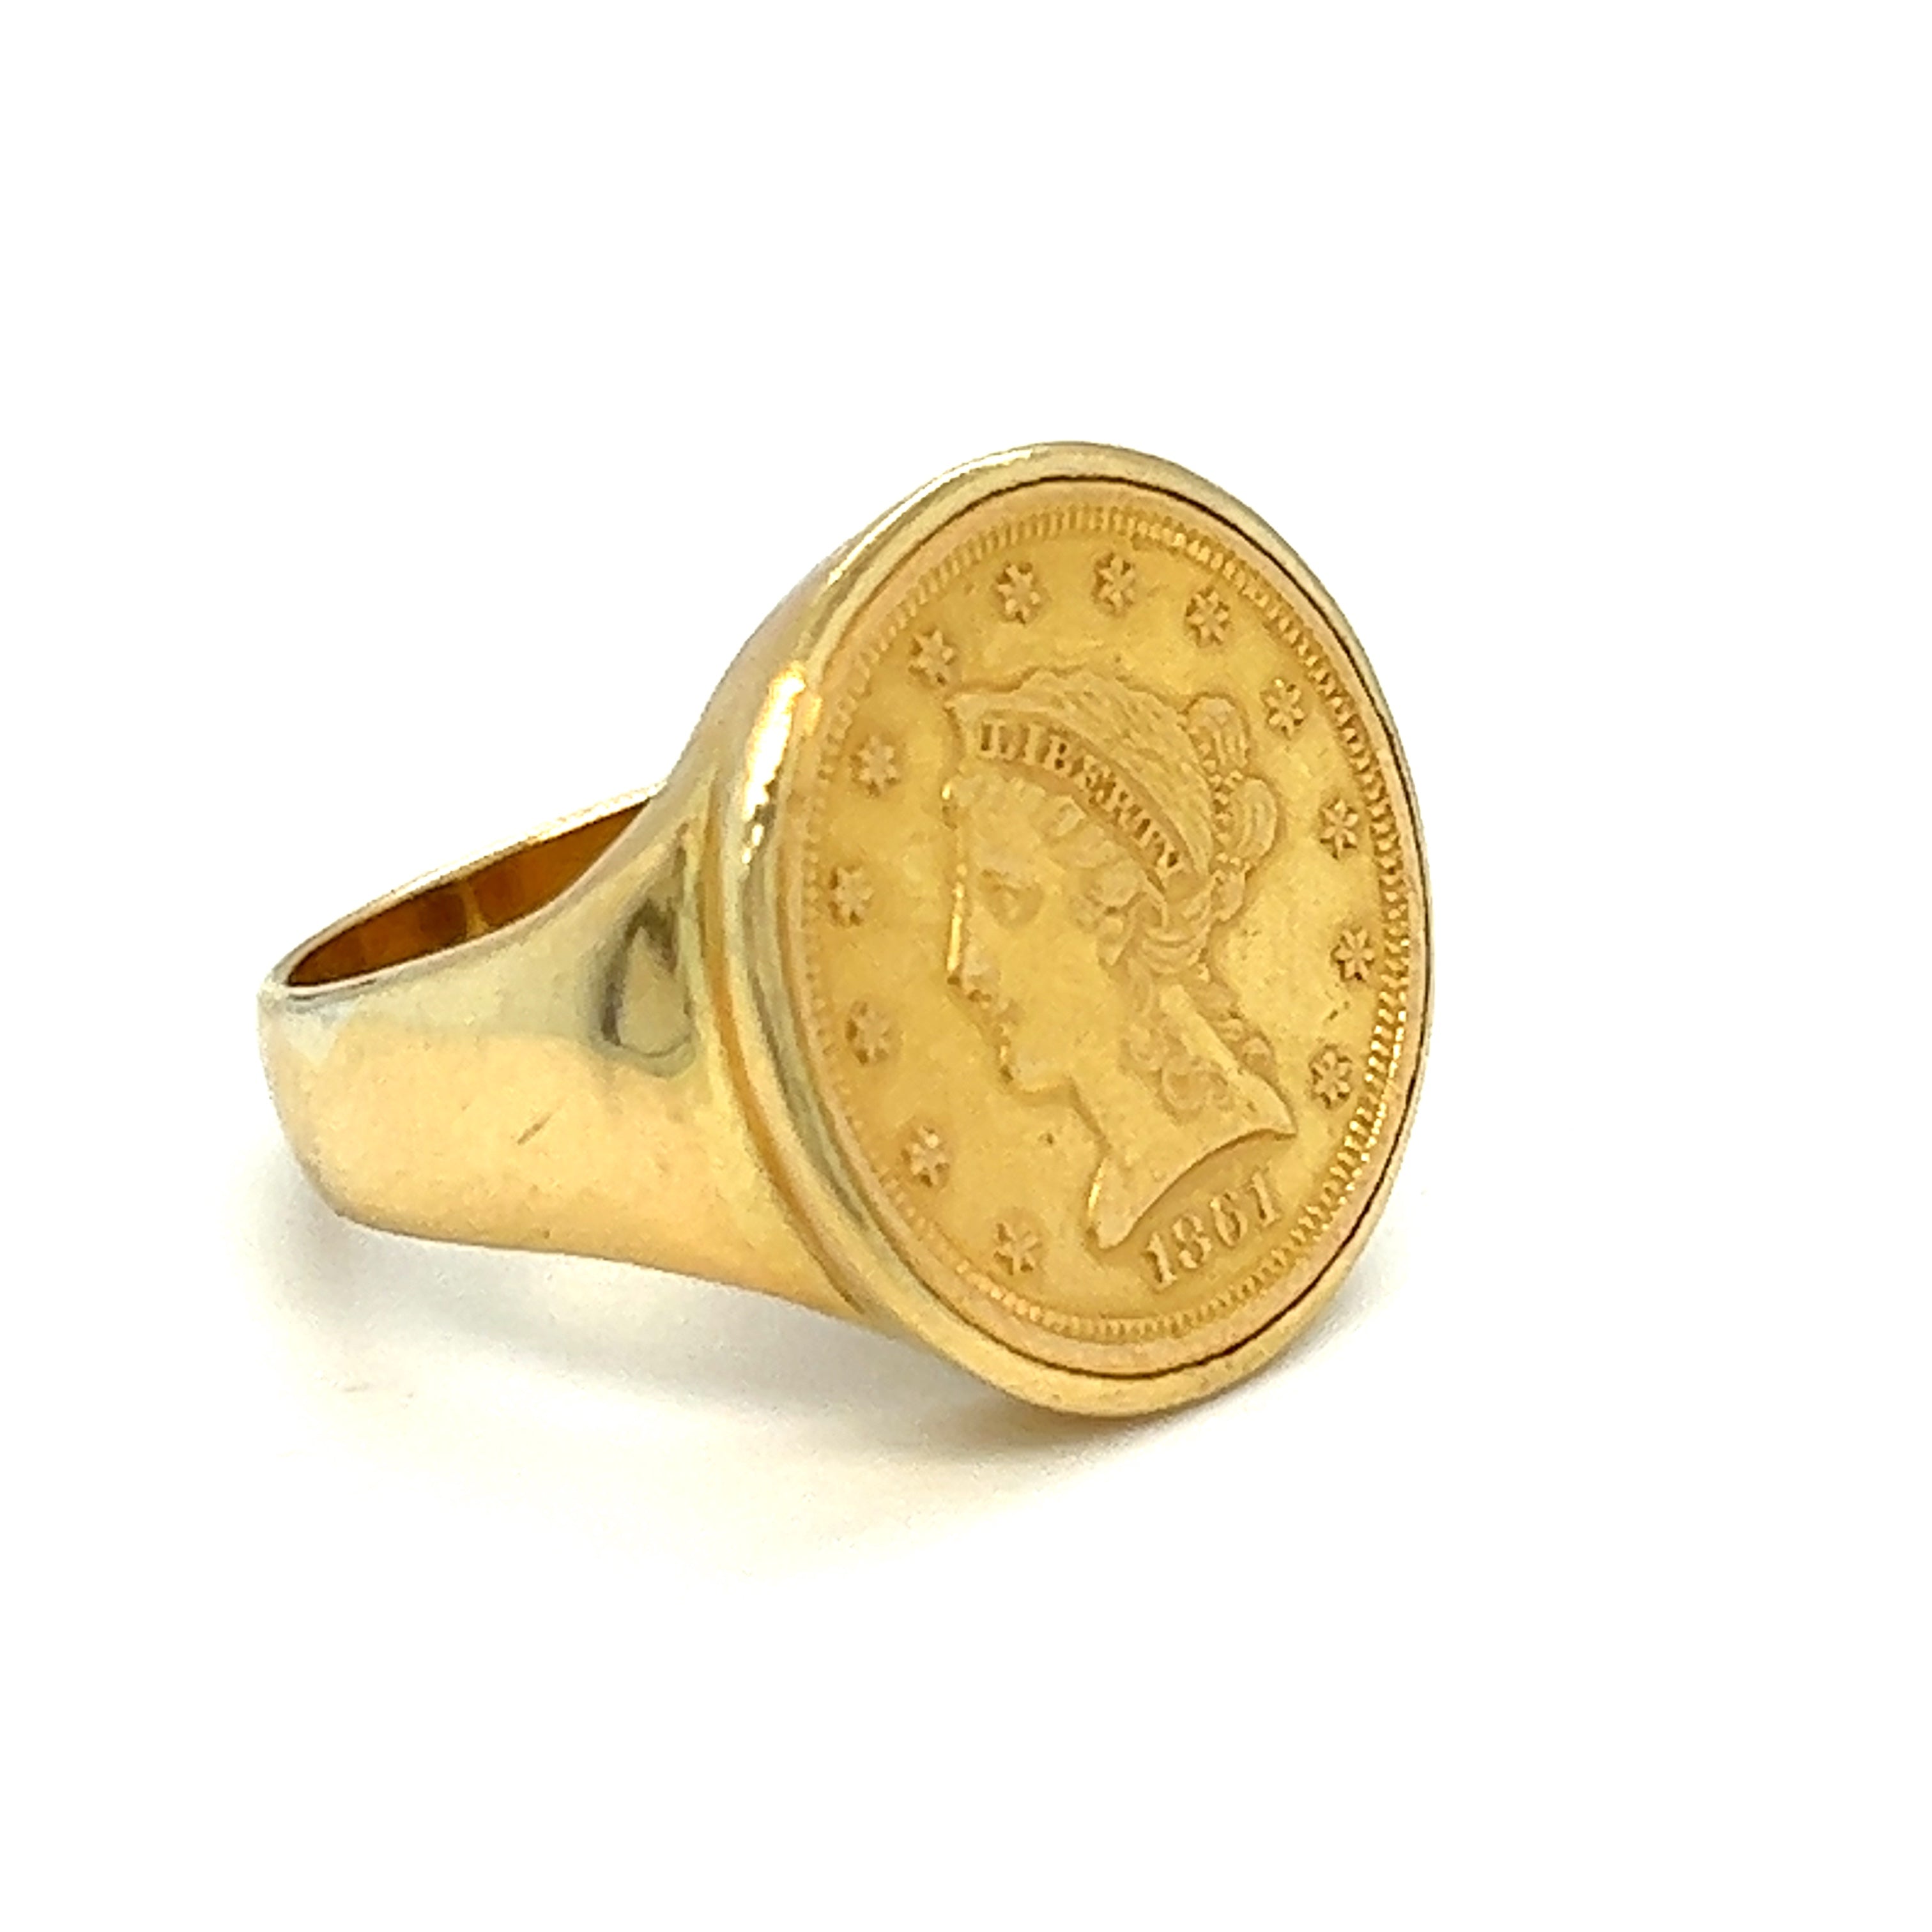 Gold Ring Featuring a Gold Coin of Alexander the Great, 18th Century CE -  19th Century CE | Barakat Gallery